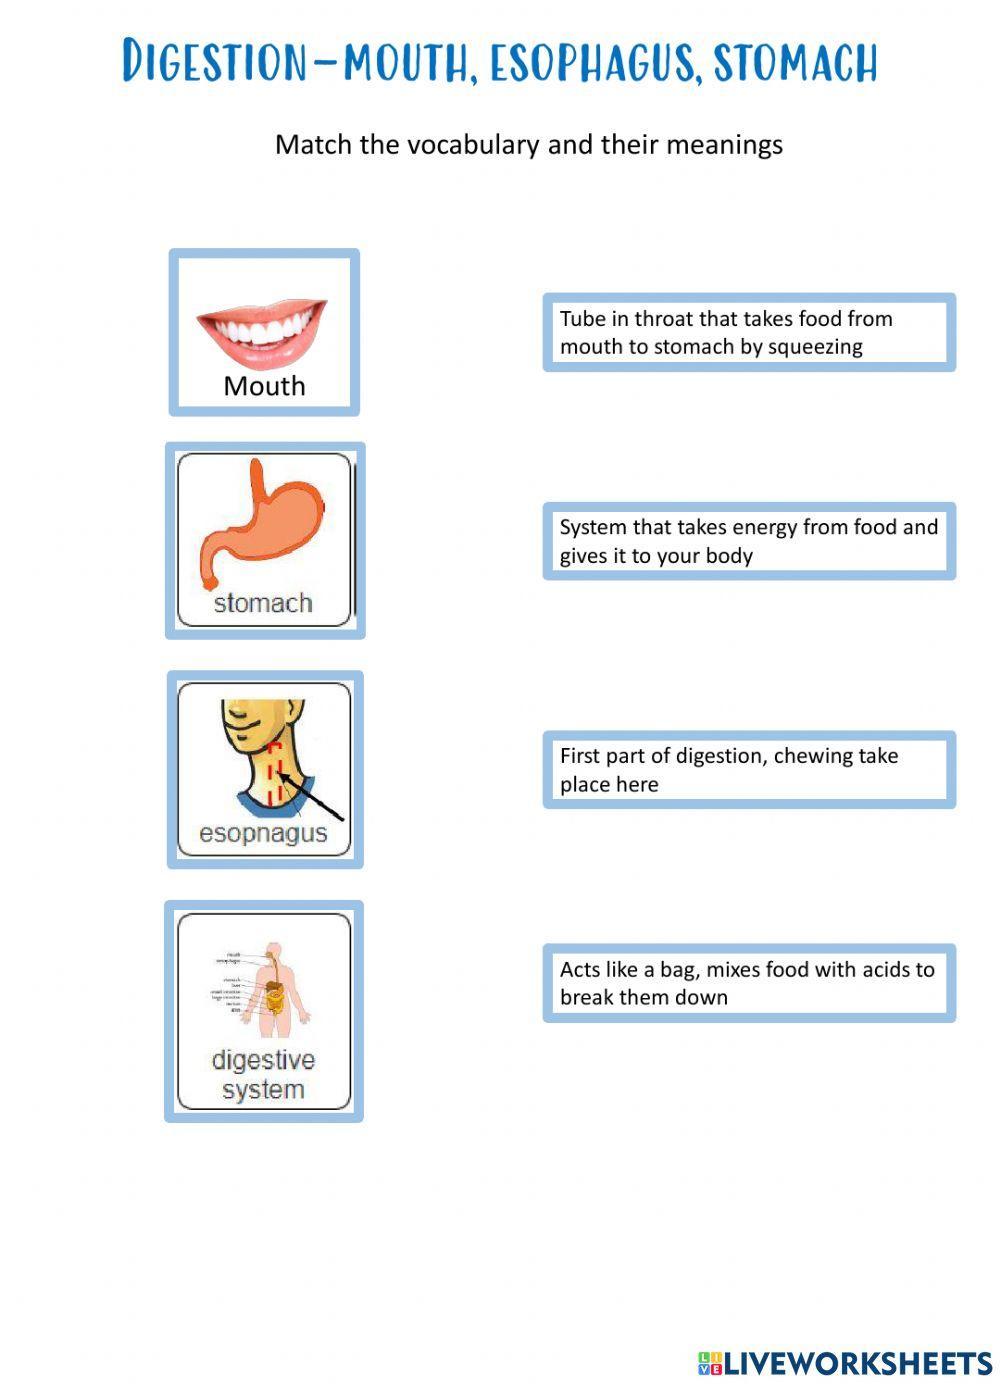 Digestive system-special needs